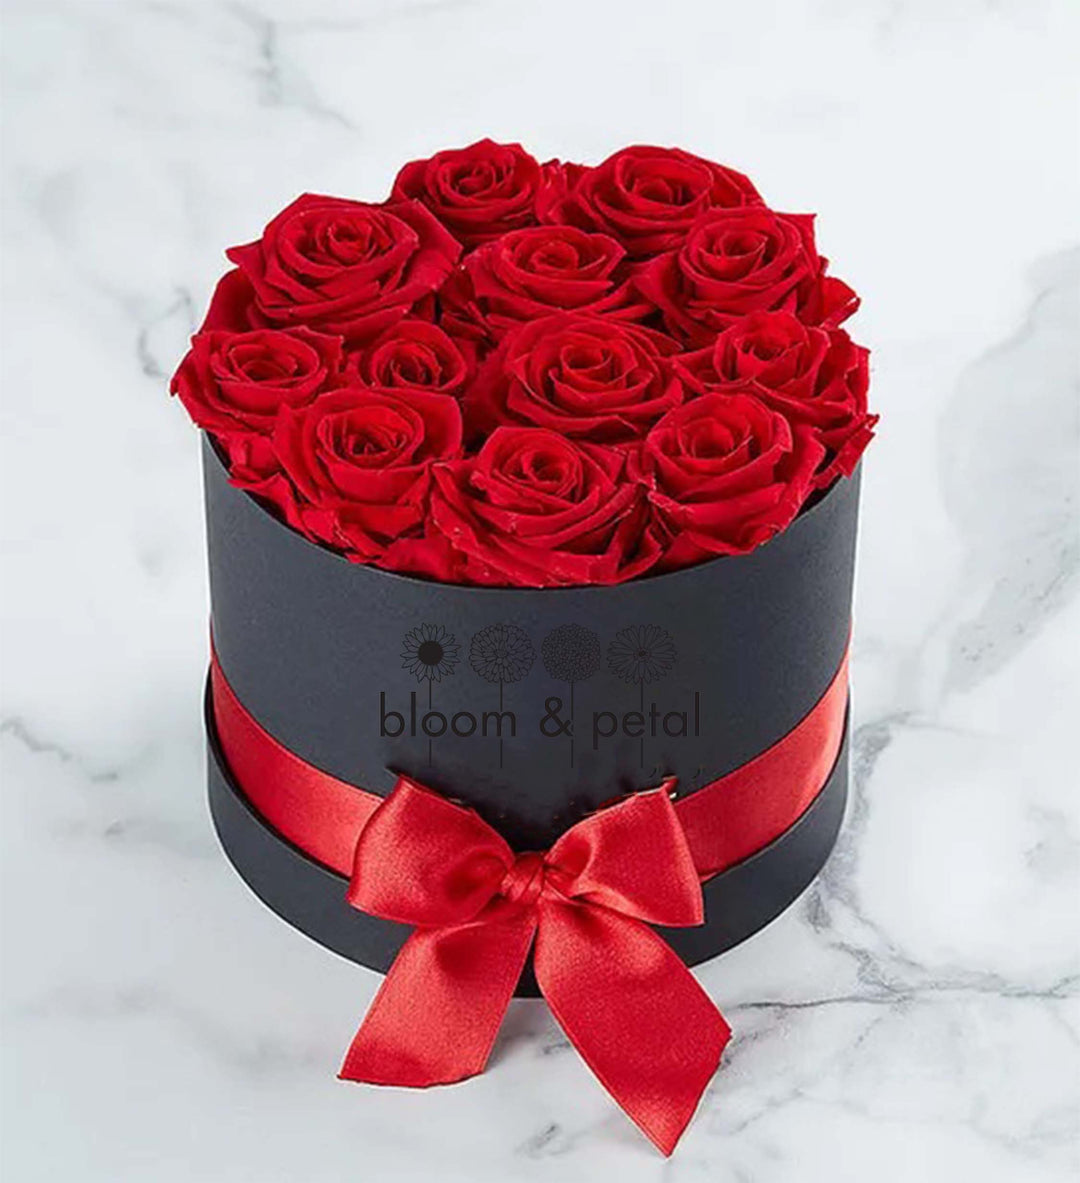 Preserved Red Roses In Gift Box - Bloom and Petal